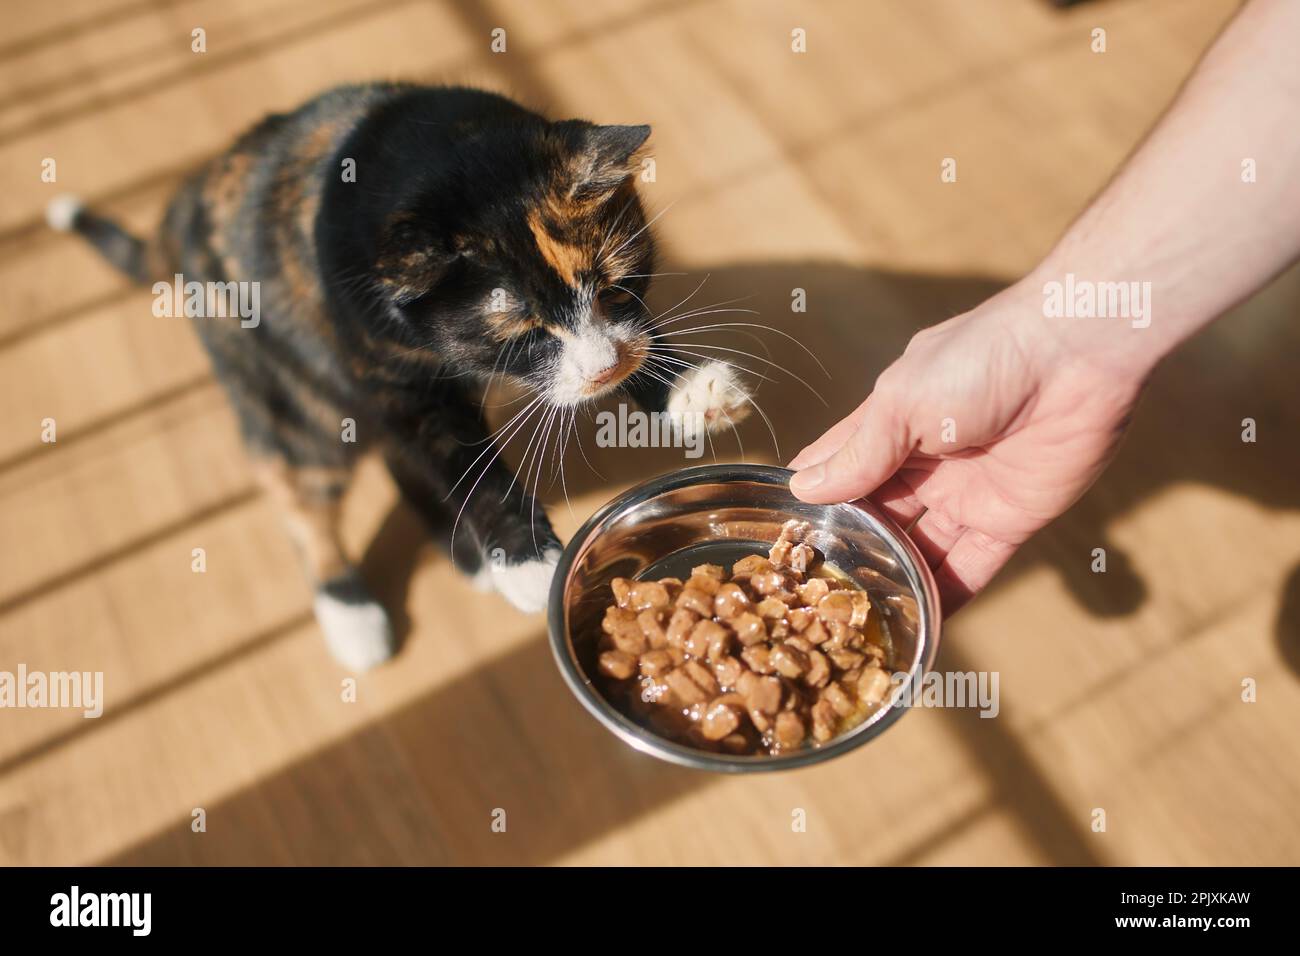 Domestic life with pet. Man giving feeding his hungry cat in morning light with shadows from the window. Stock Photo